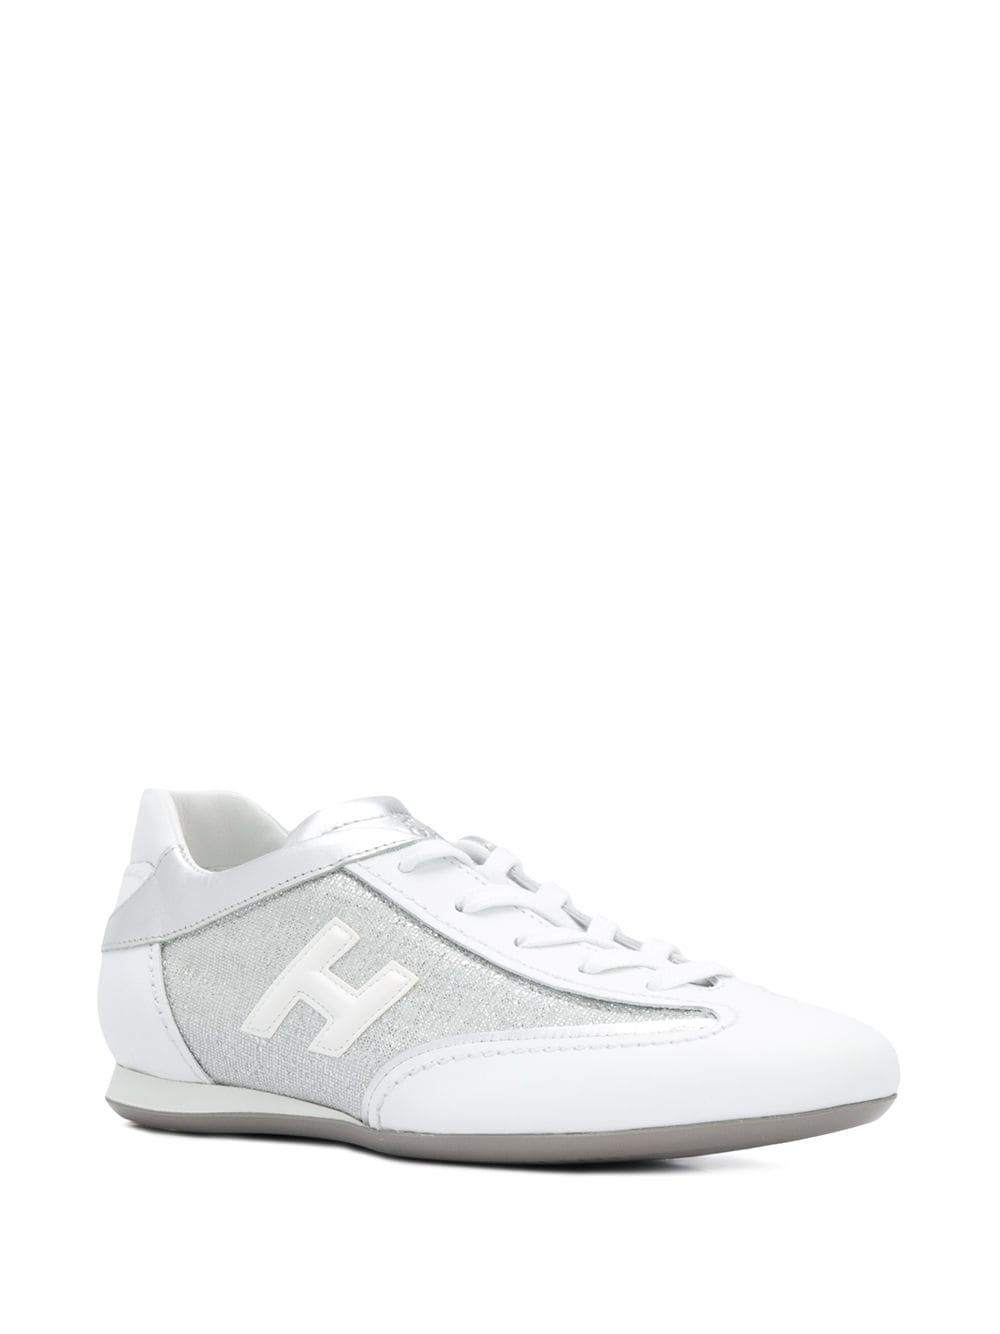 hogan OLYMPIA SNEAKERS available on 